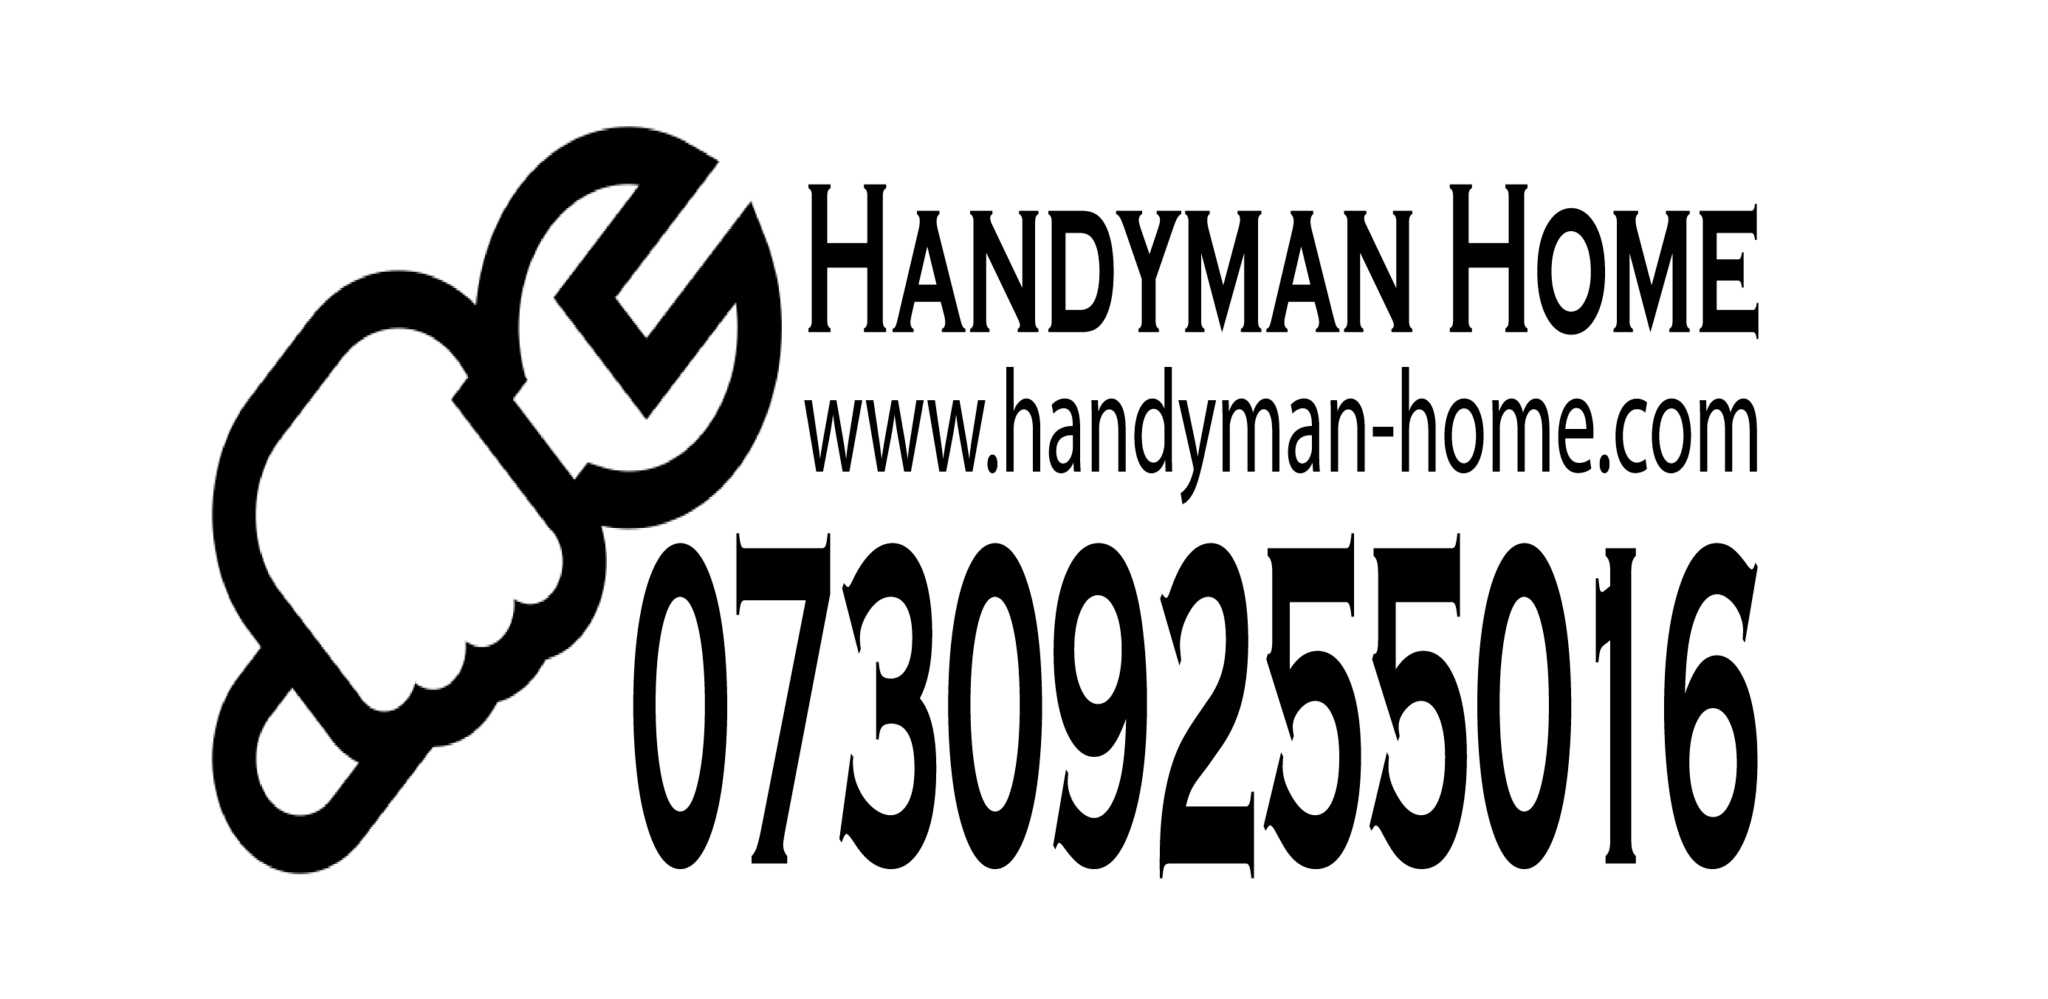 Local Handy Man - Handyman Home In Bristol, Portishead, Clevedon, Nailsea, Flatpack Assembly, Flat Pack Fitter, Tv Wall Mounting, Painting &Amp; Decorating, Heavy Lifting Helper, Curtain Pole &Amp; Blinds Installation, Curtains, Blind Fitting, General Maintenance &Amp; Diy